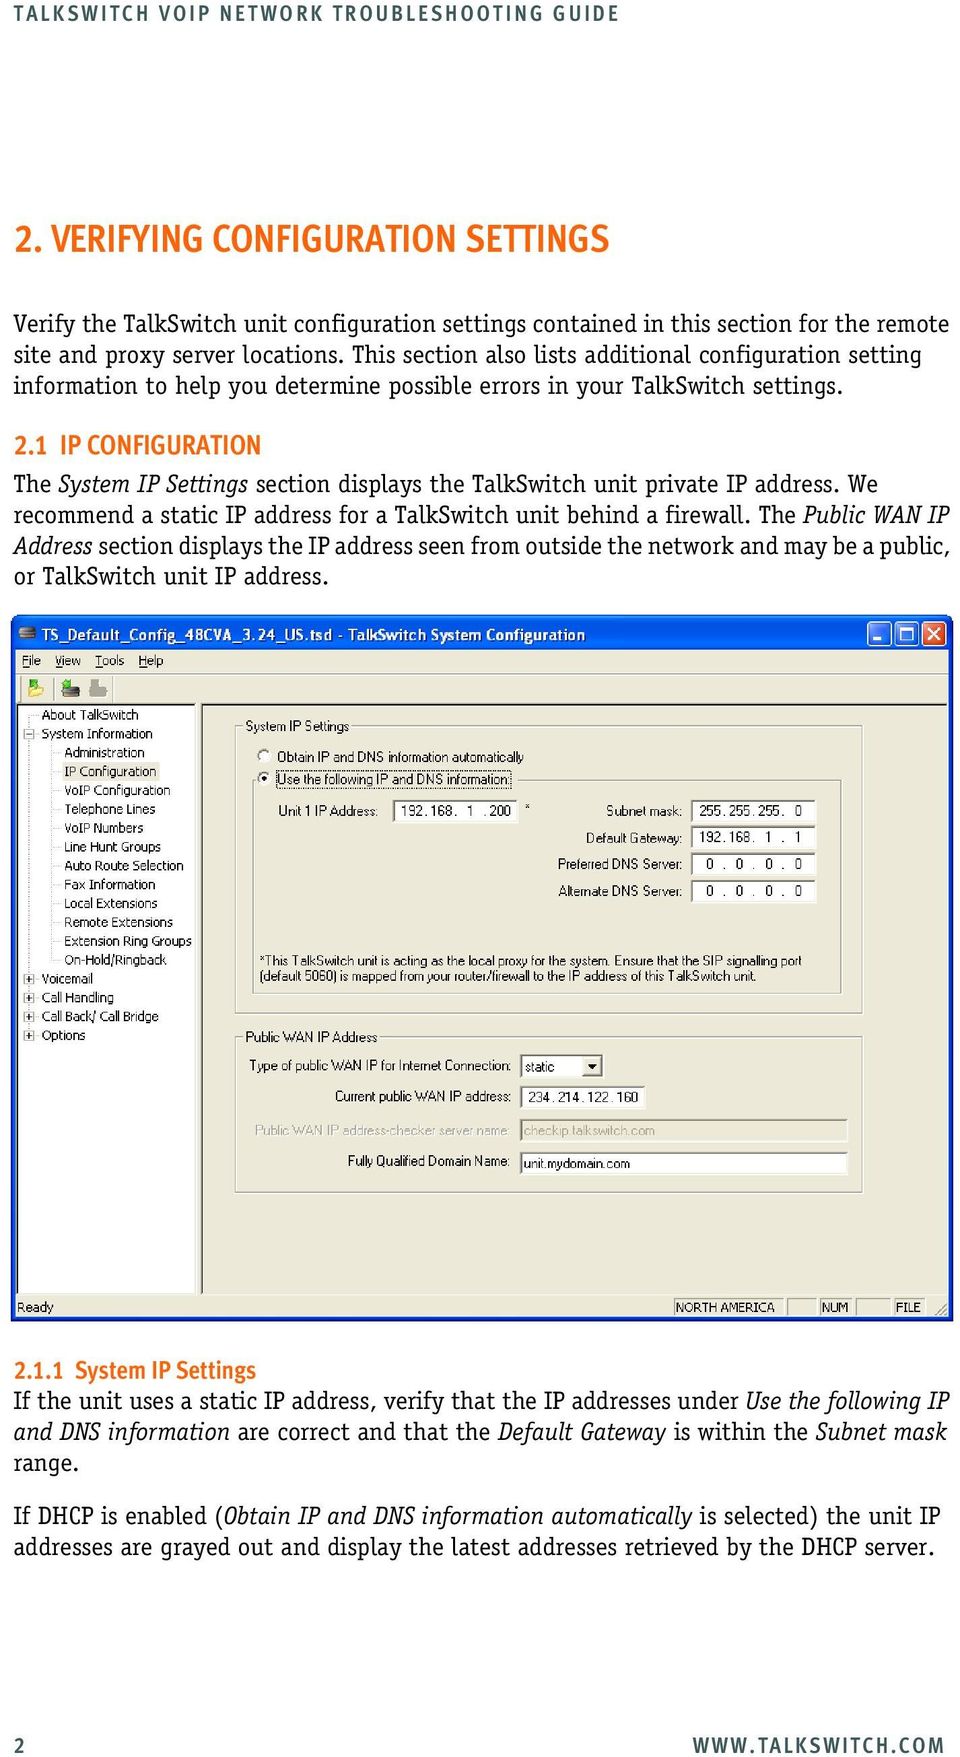 1 IP CONFIGURATION The System IP Settings section displays the TalkSwitch unit private IP address. We recommend a static IP address for a TalkSwitch unit behind a firewall.